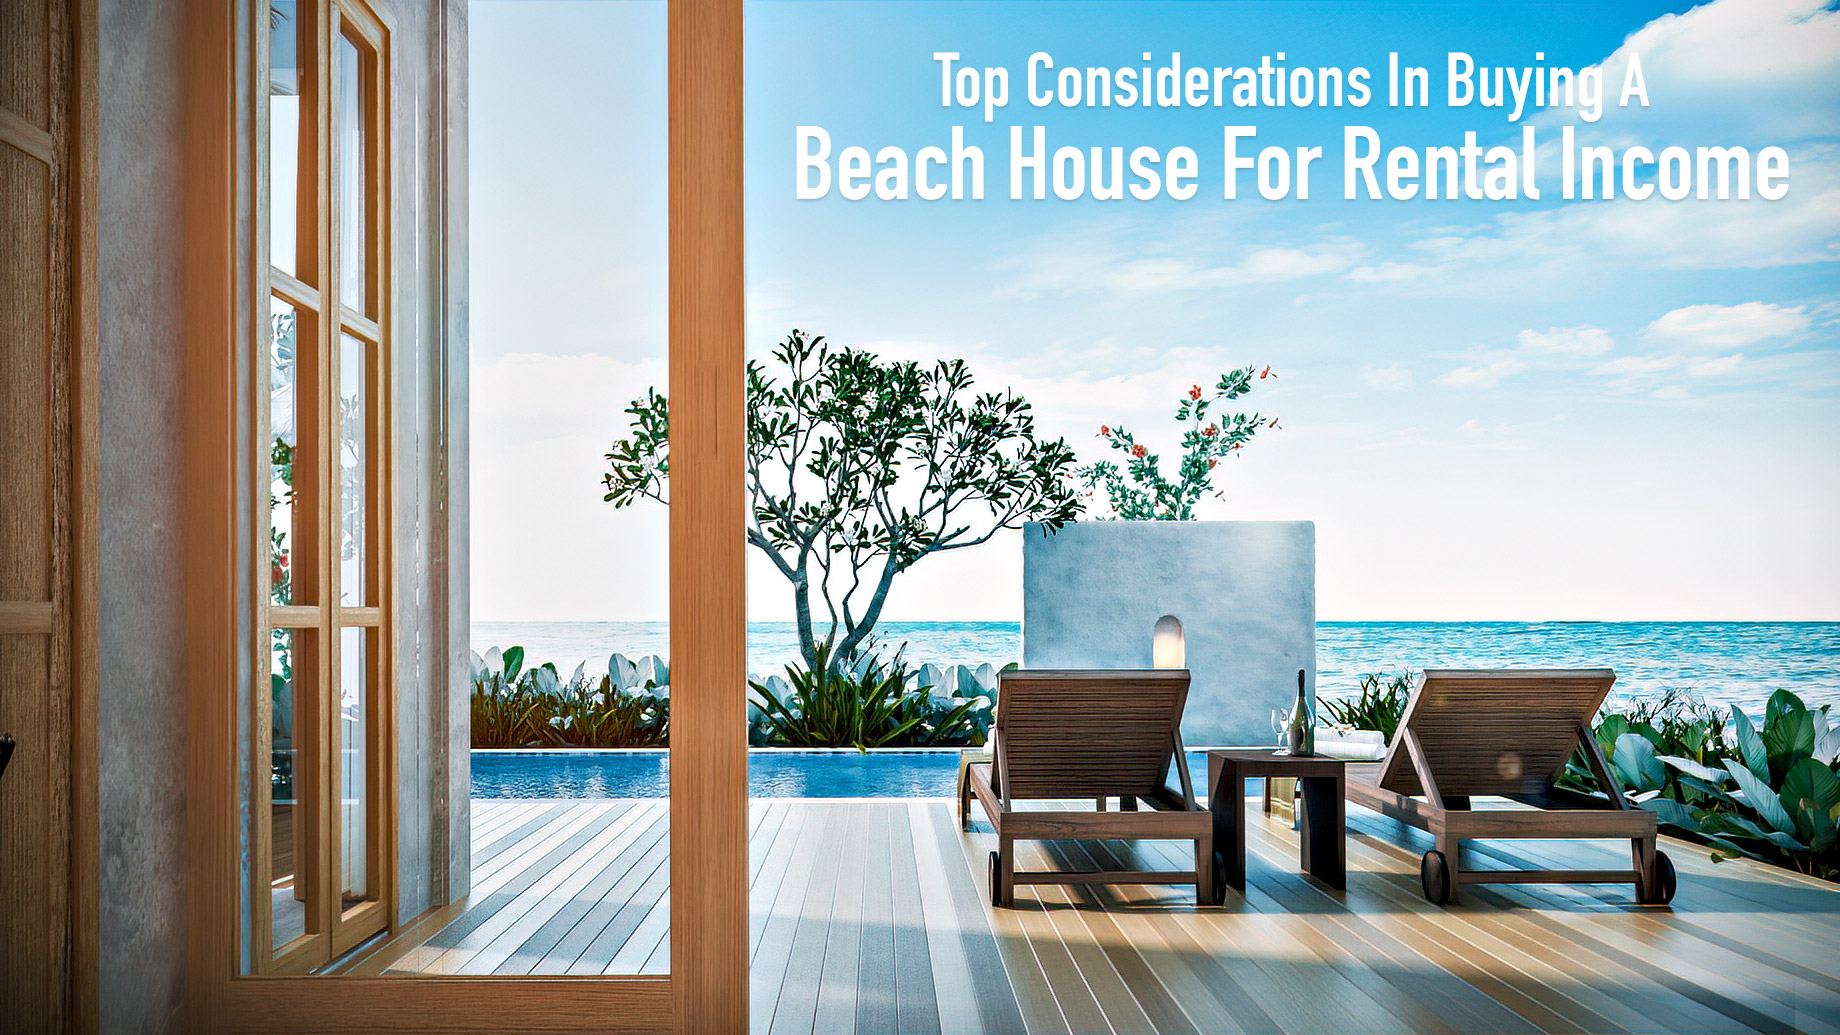 Top Considerations In Buying A Beach House For Rental Income